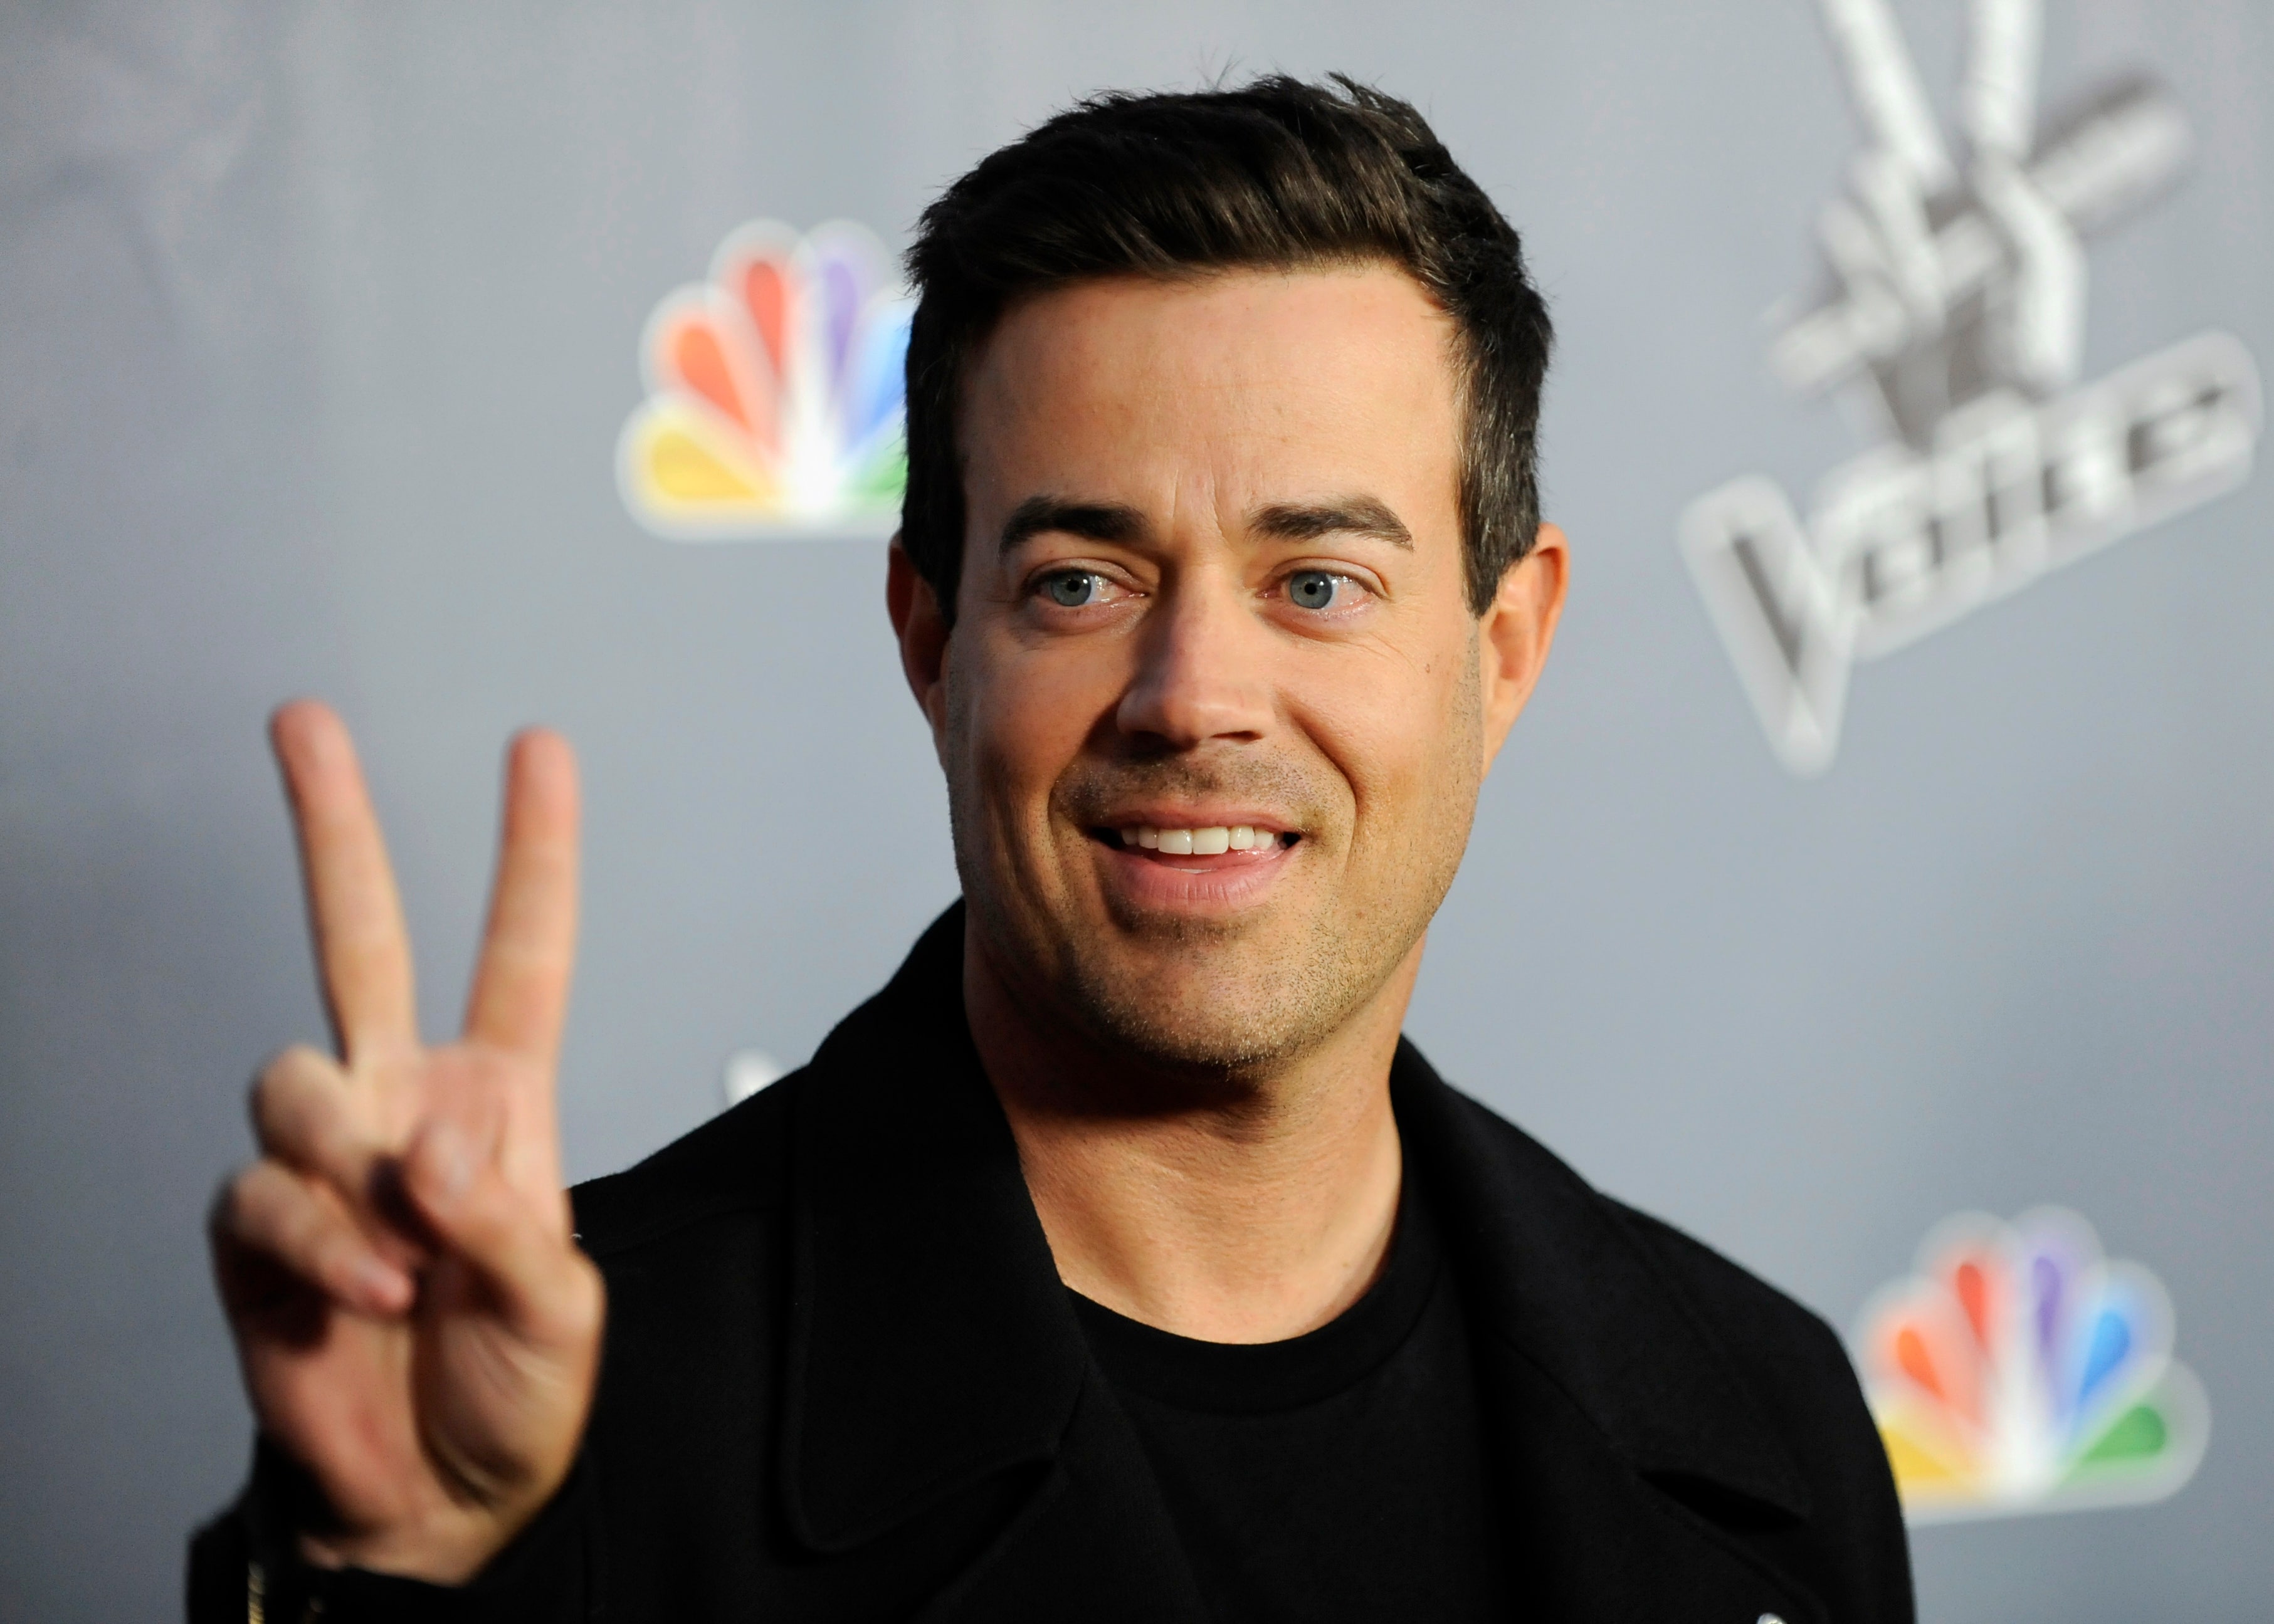 Carson Daly dishes on guilty pleasure.